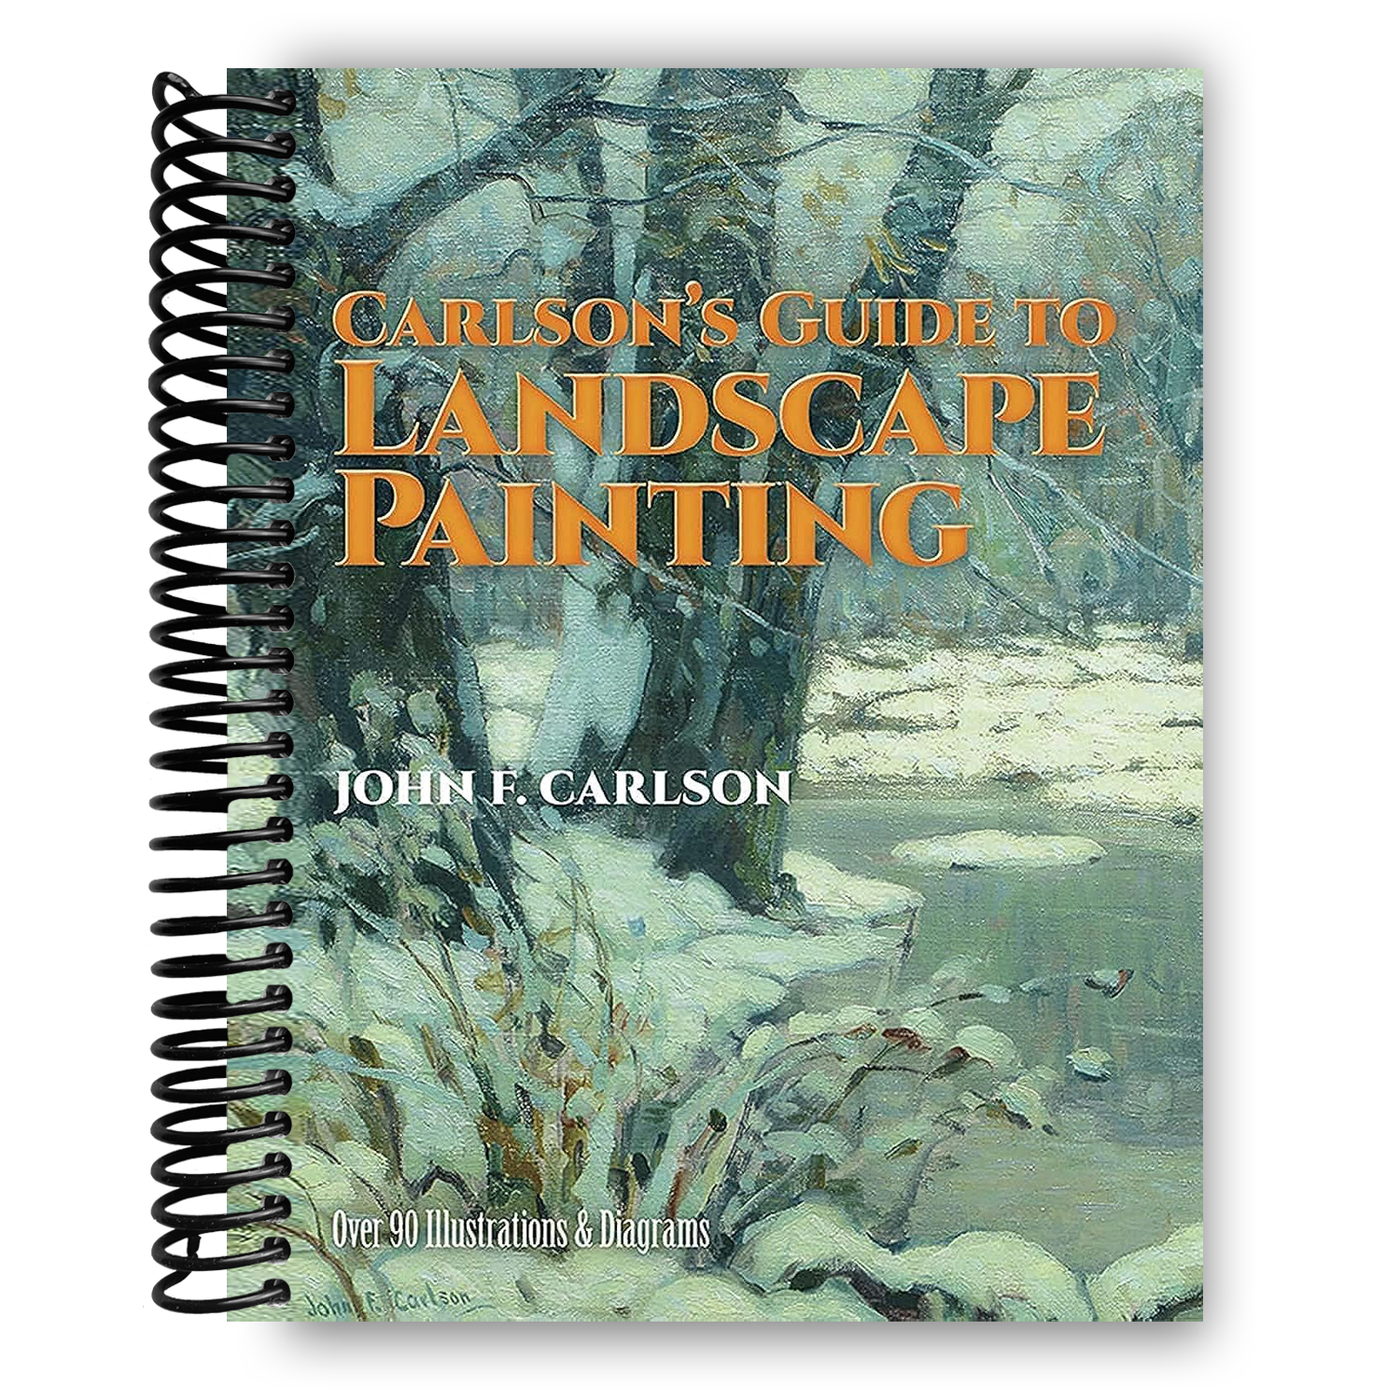 Carlson's Guide to Landscape Painting (Spiral Bound)